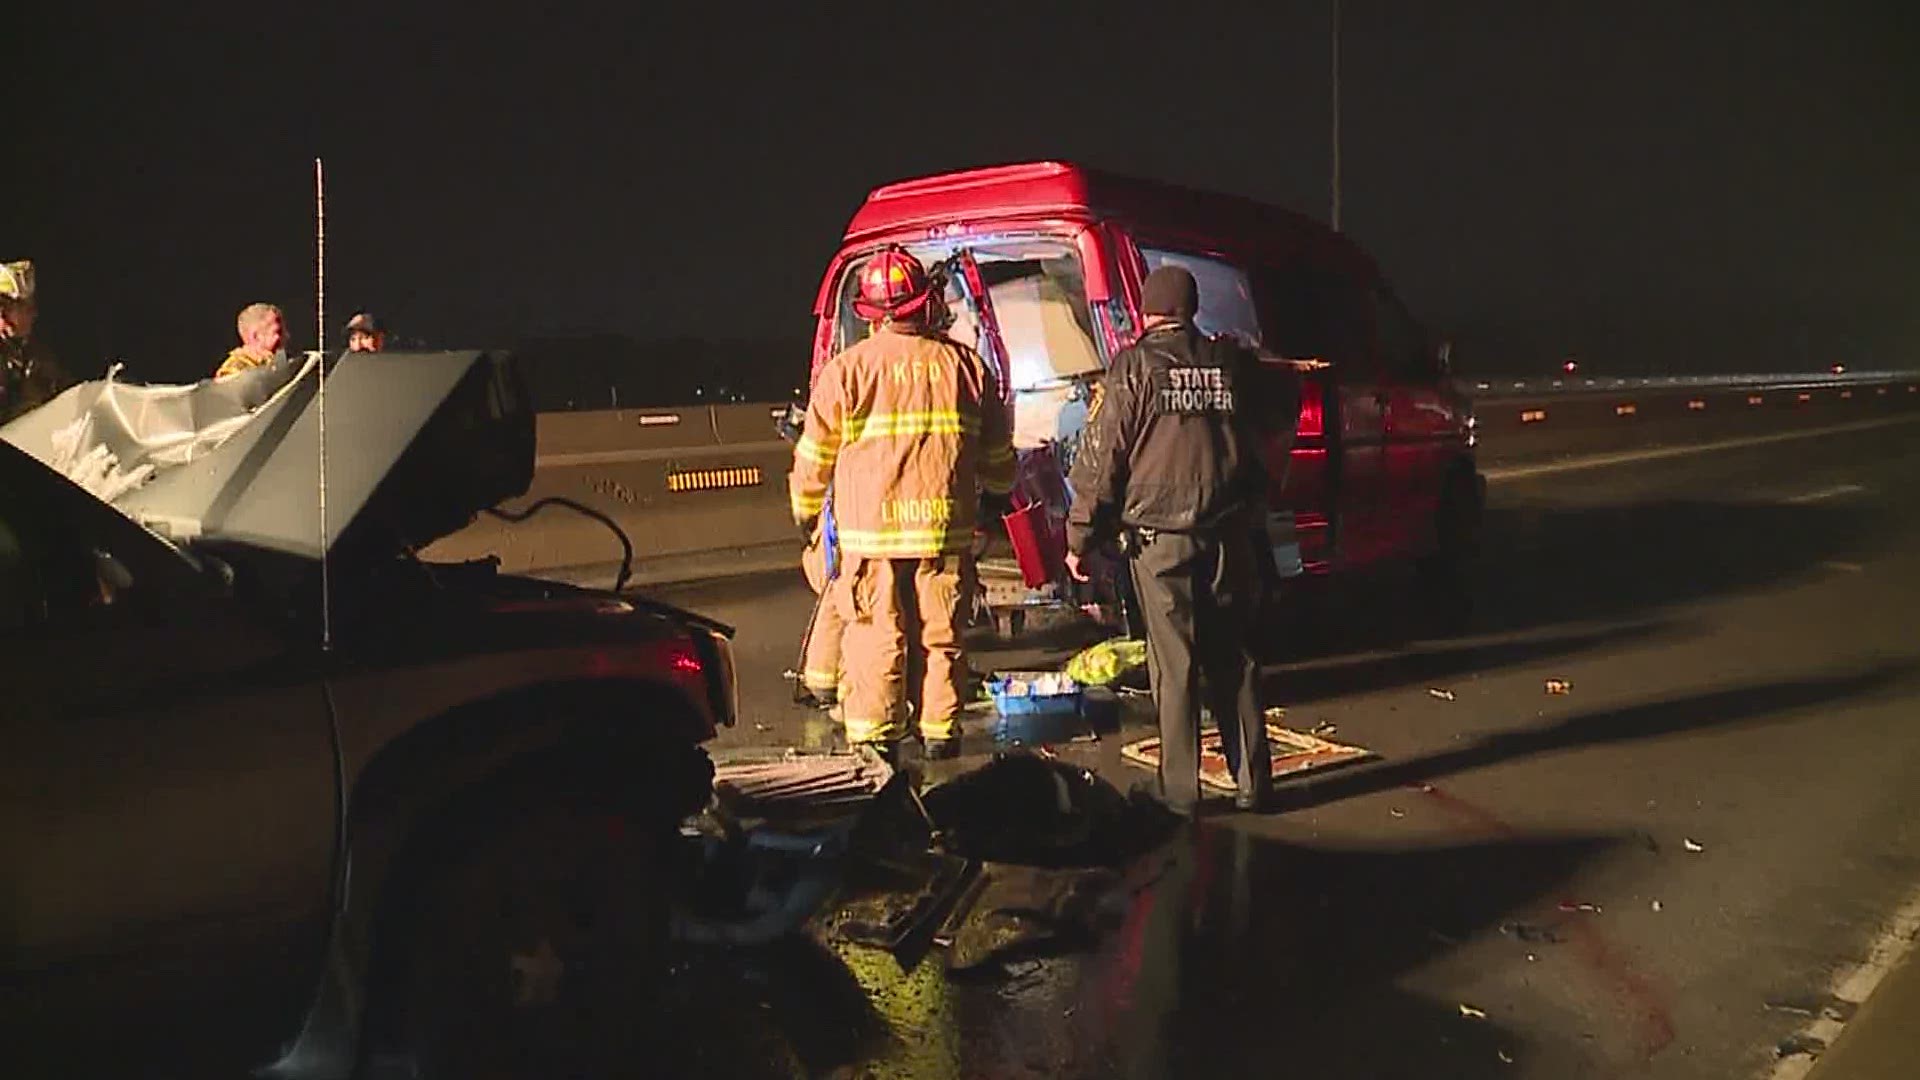 The North Cross Valley Expressway is open again after Wednesday night's crash.